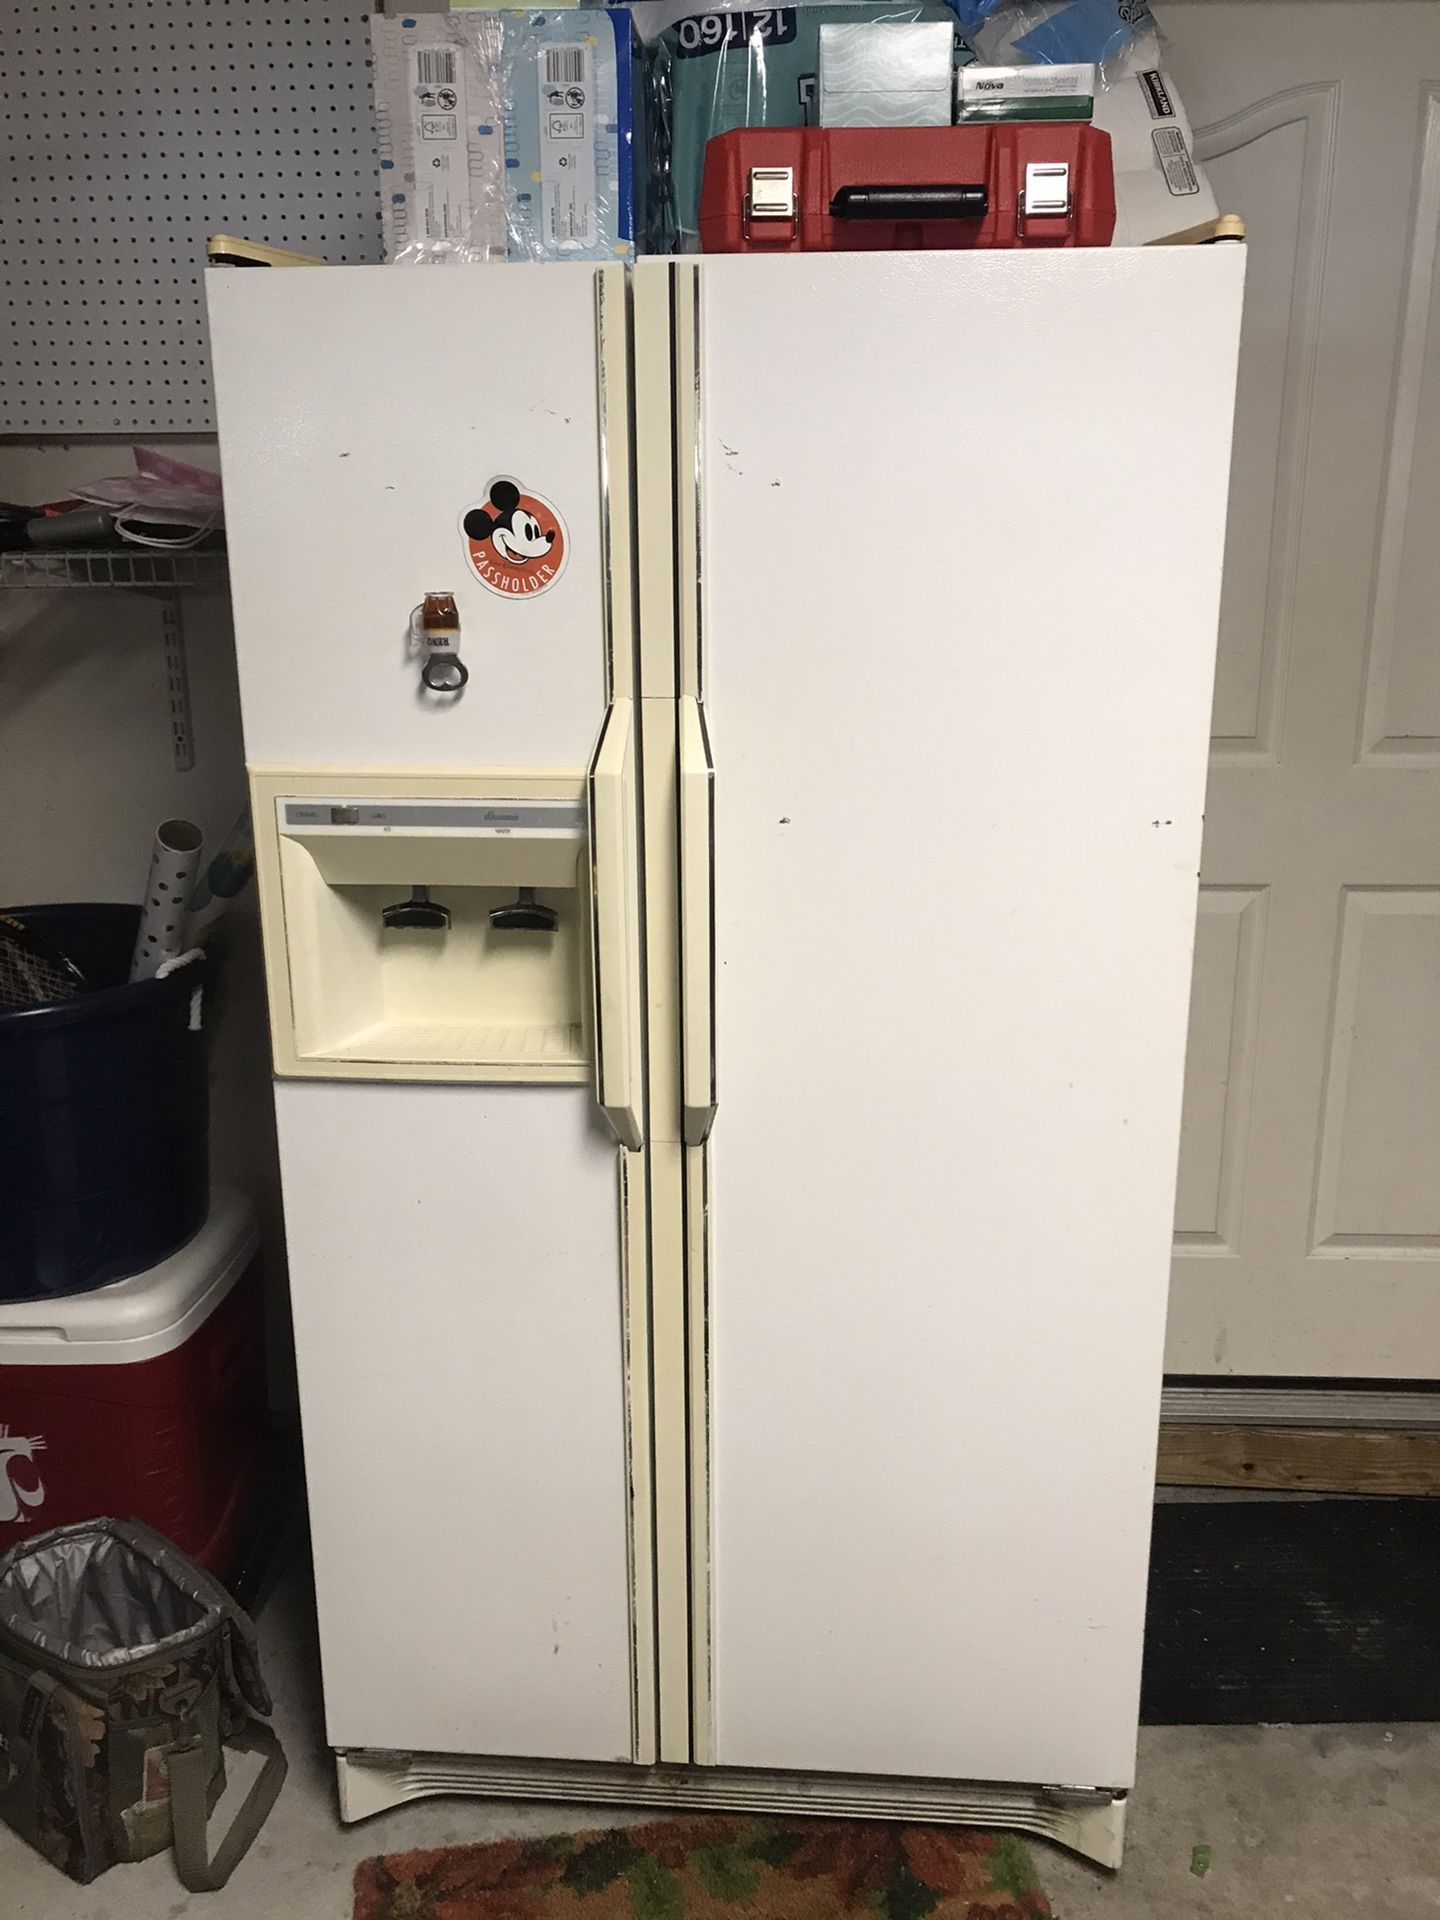 Working Refrigerator with Ice Maker